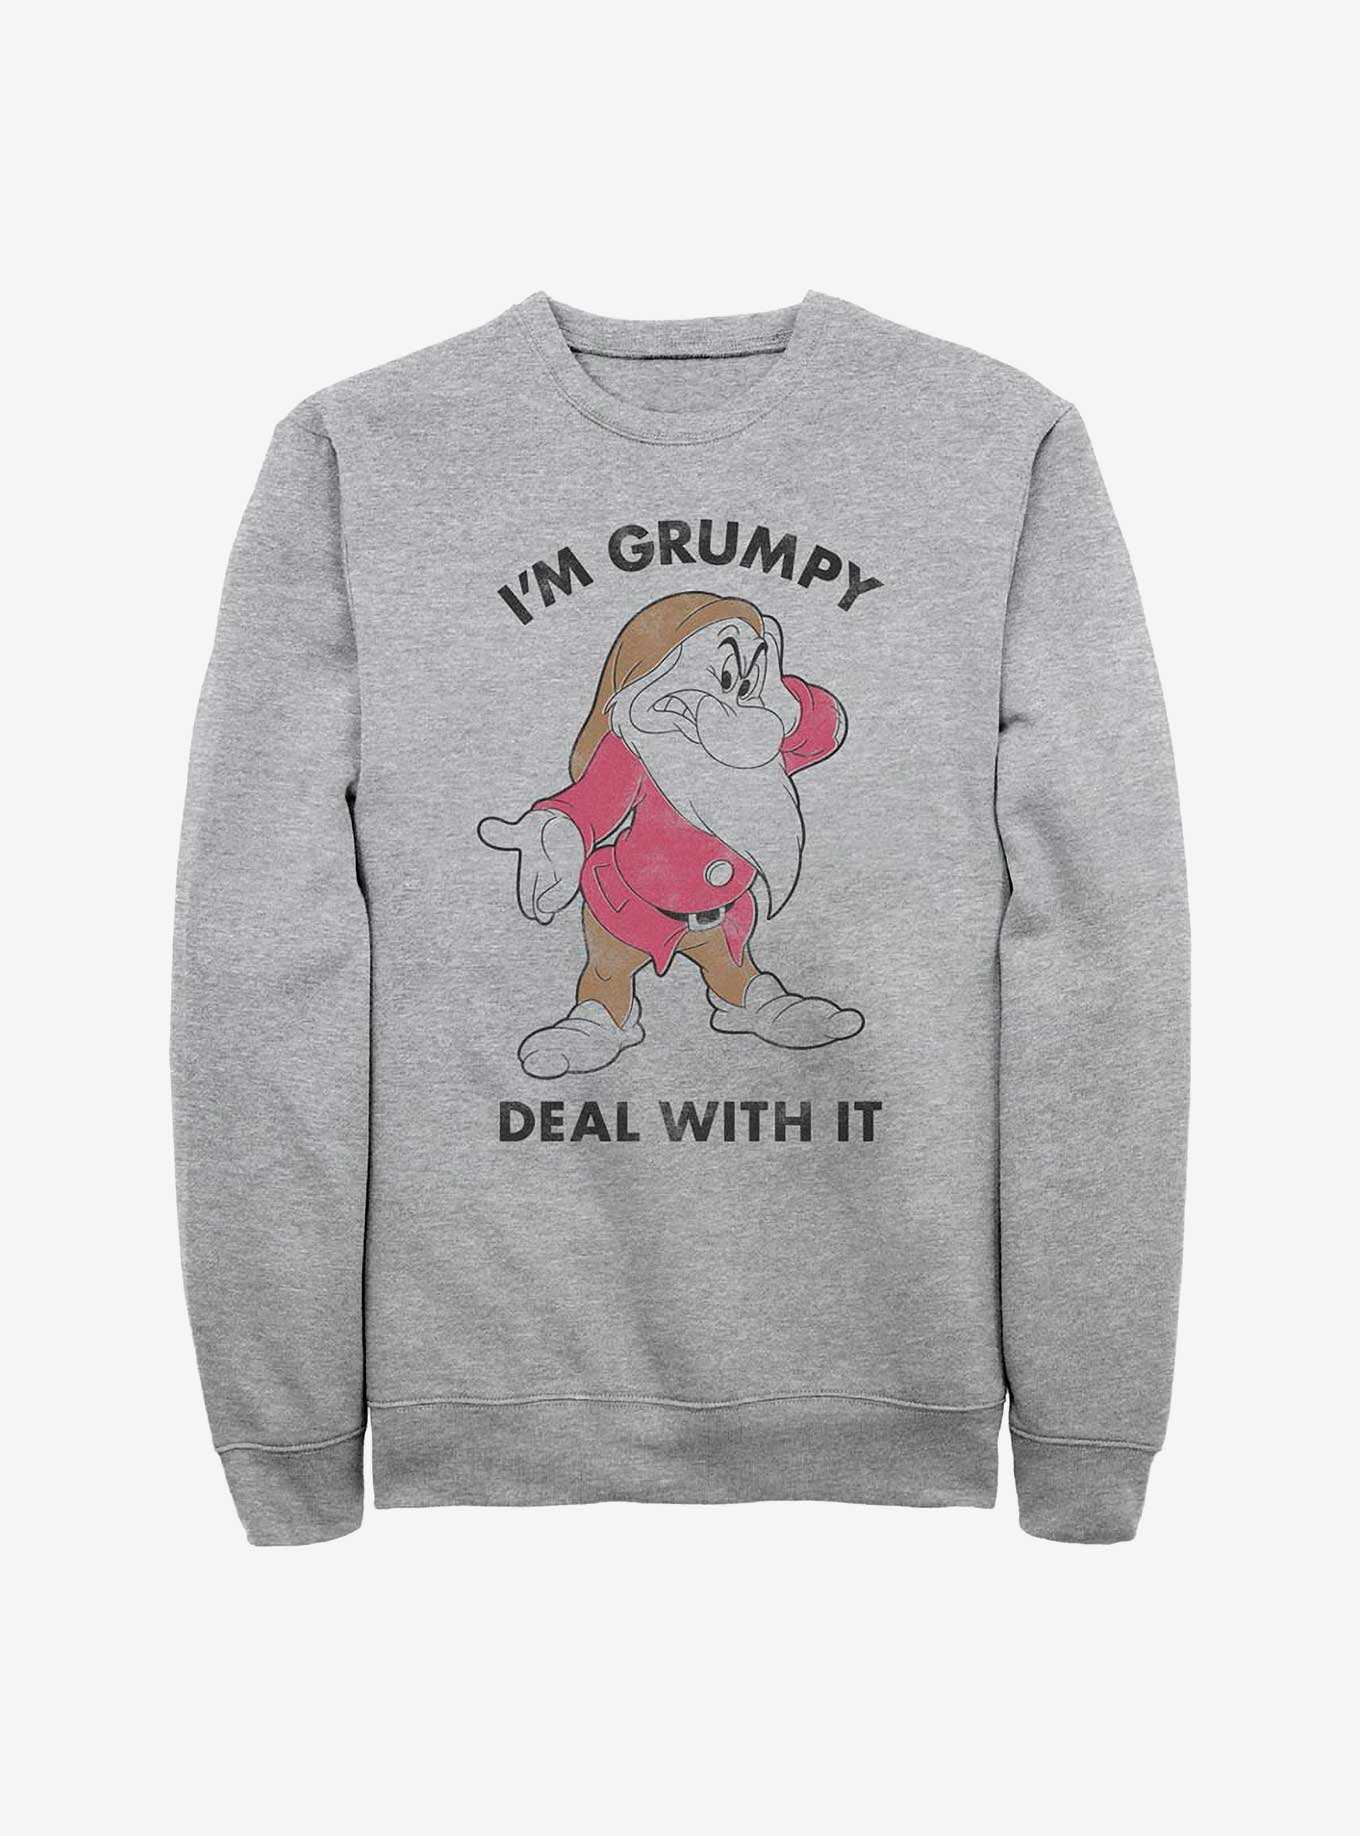 Disney Snow White and the Seven Dwarfs Deal With It Sweatshirt, , hi-res